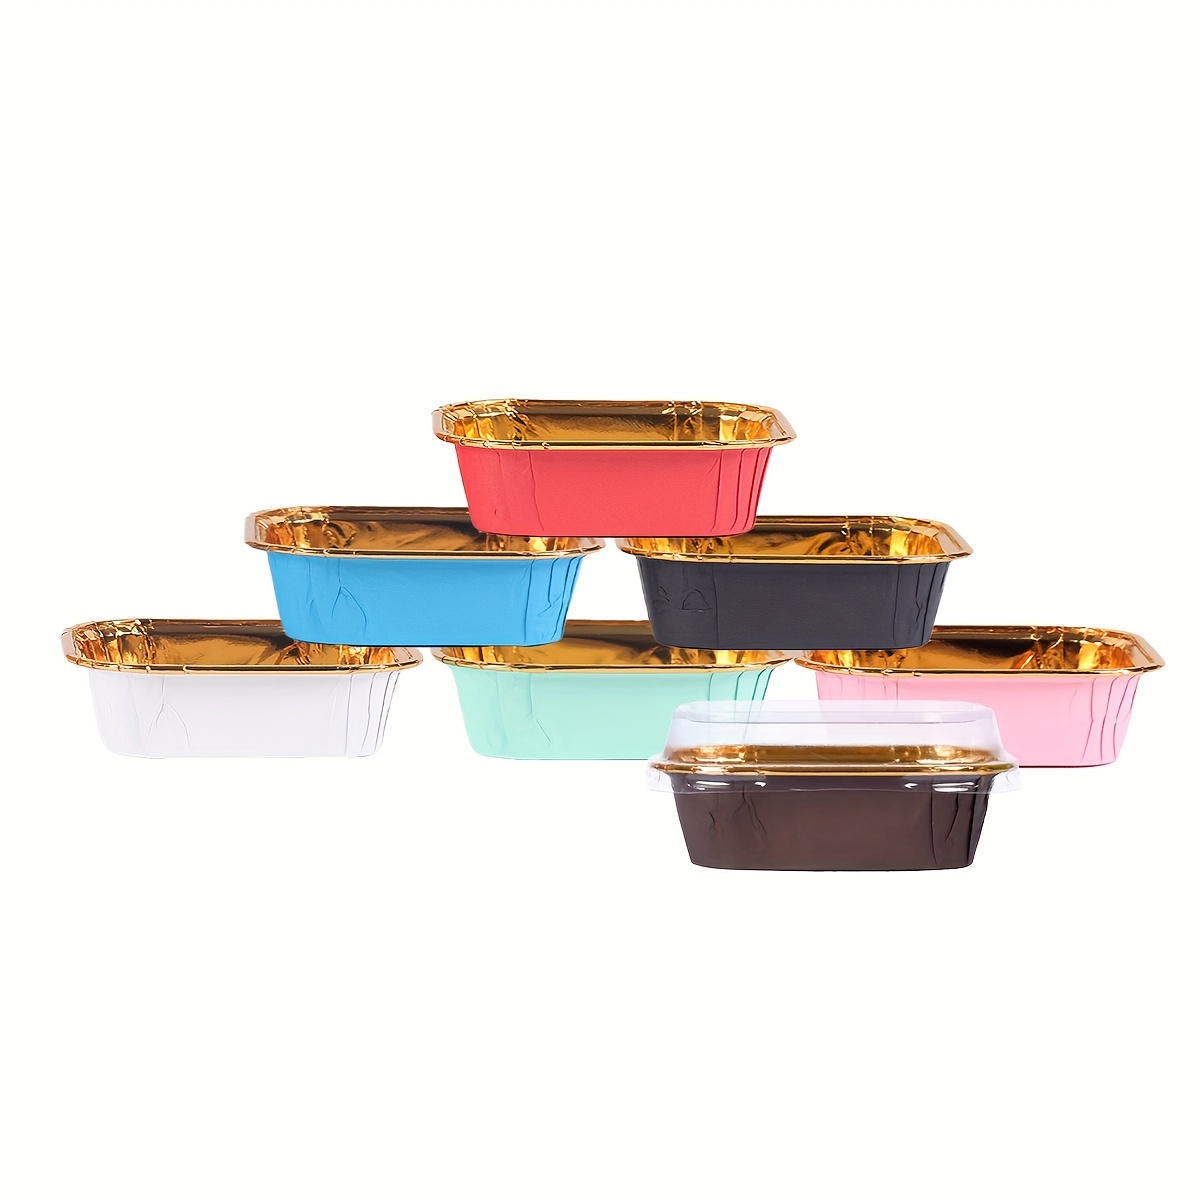 Rectangle Cake Cup, Paper Loaf Pan, Heat Resistant Paper Cupcake